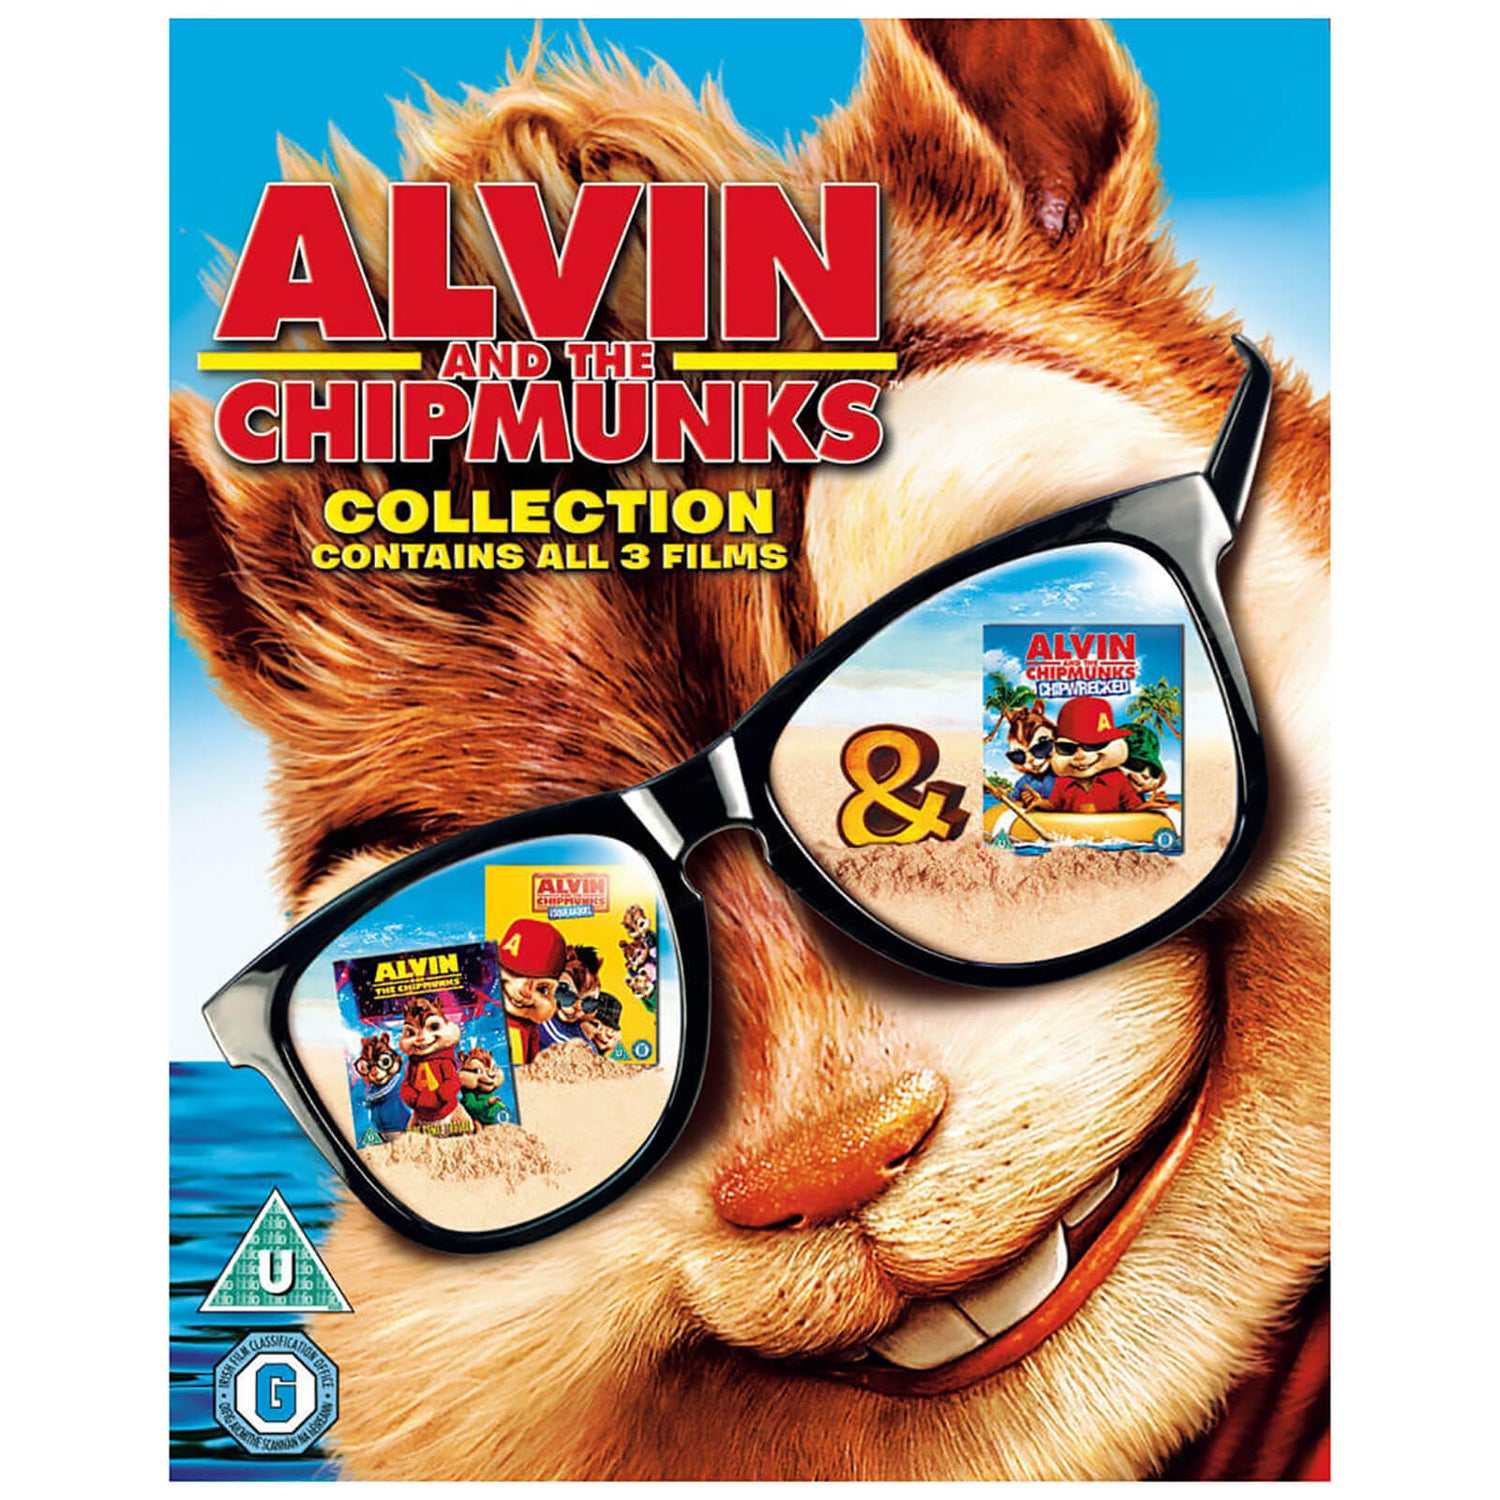 Alvin And The Chipmunks Having Sex - Alvin and the Chipmunks Collection Blu-ray - Zavvi UK